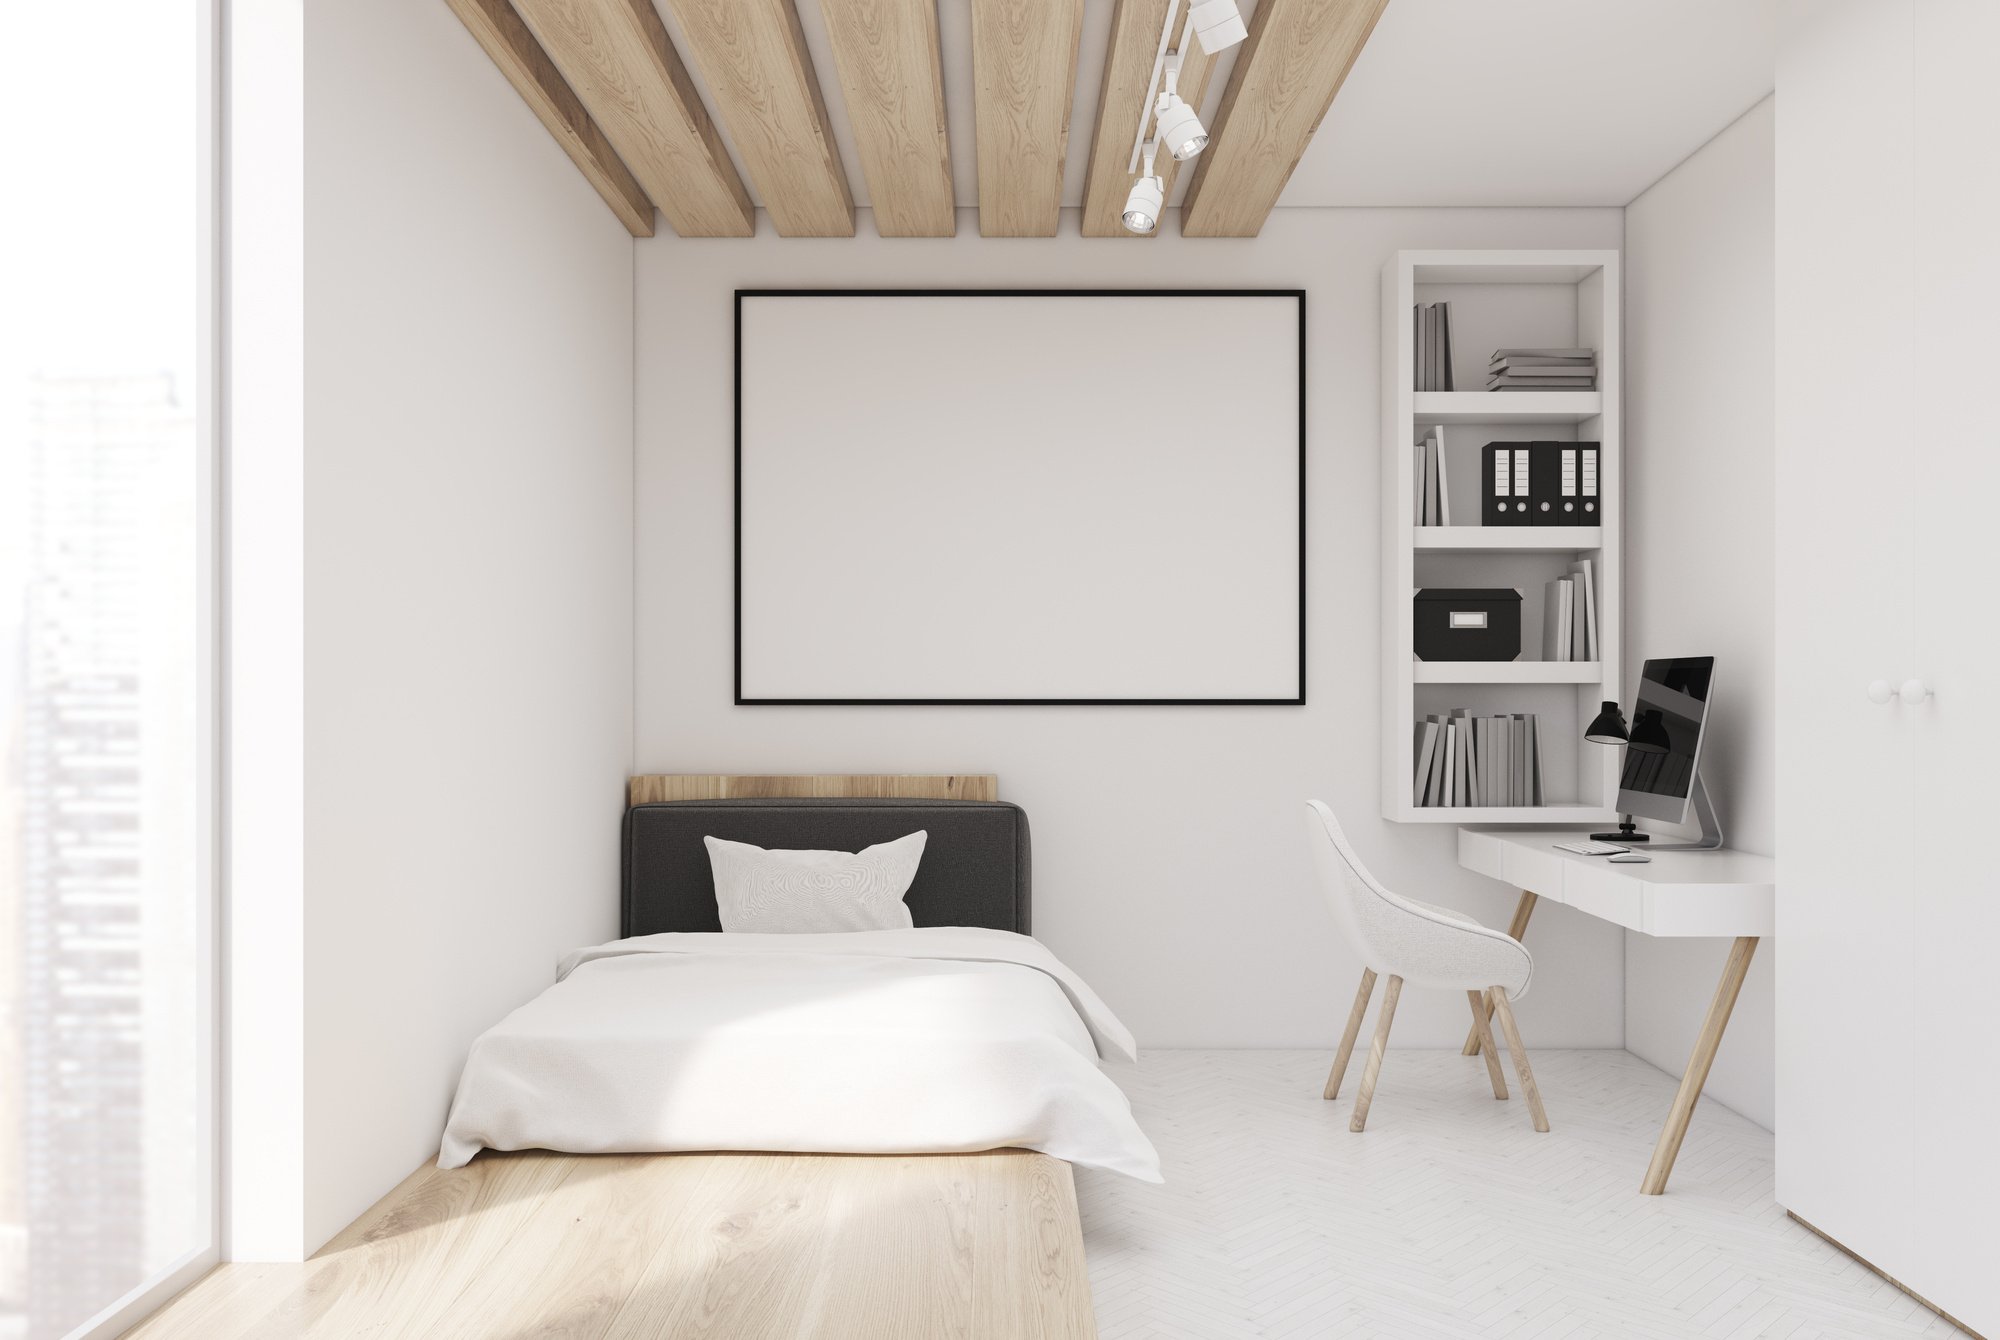 When it comes to styling a smart, functional, and stylish bedroom workspace, explore these small bedroom office combo ideas!